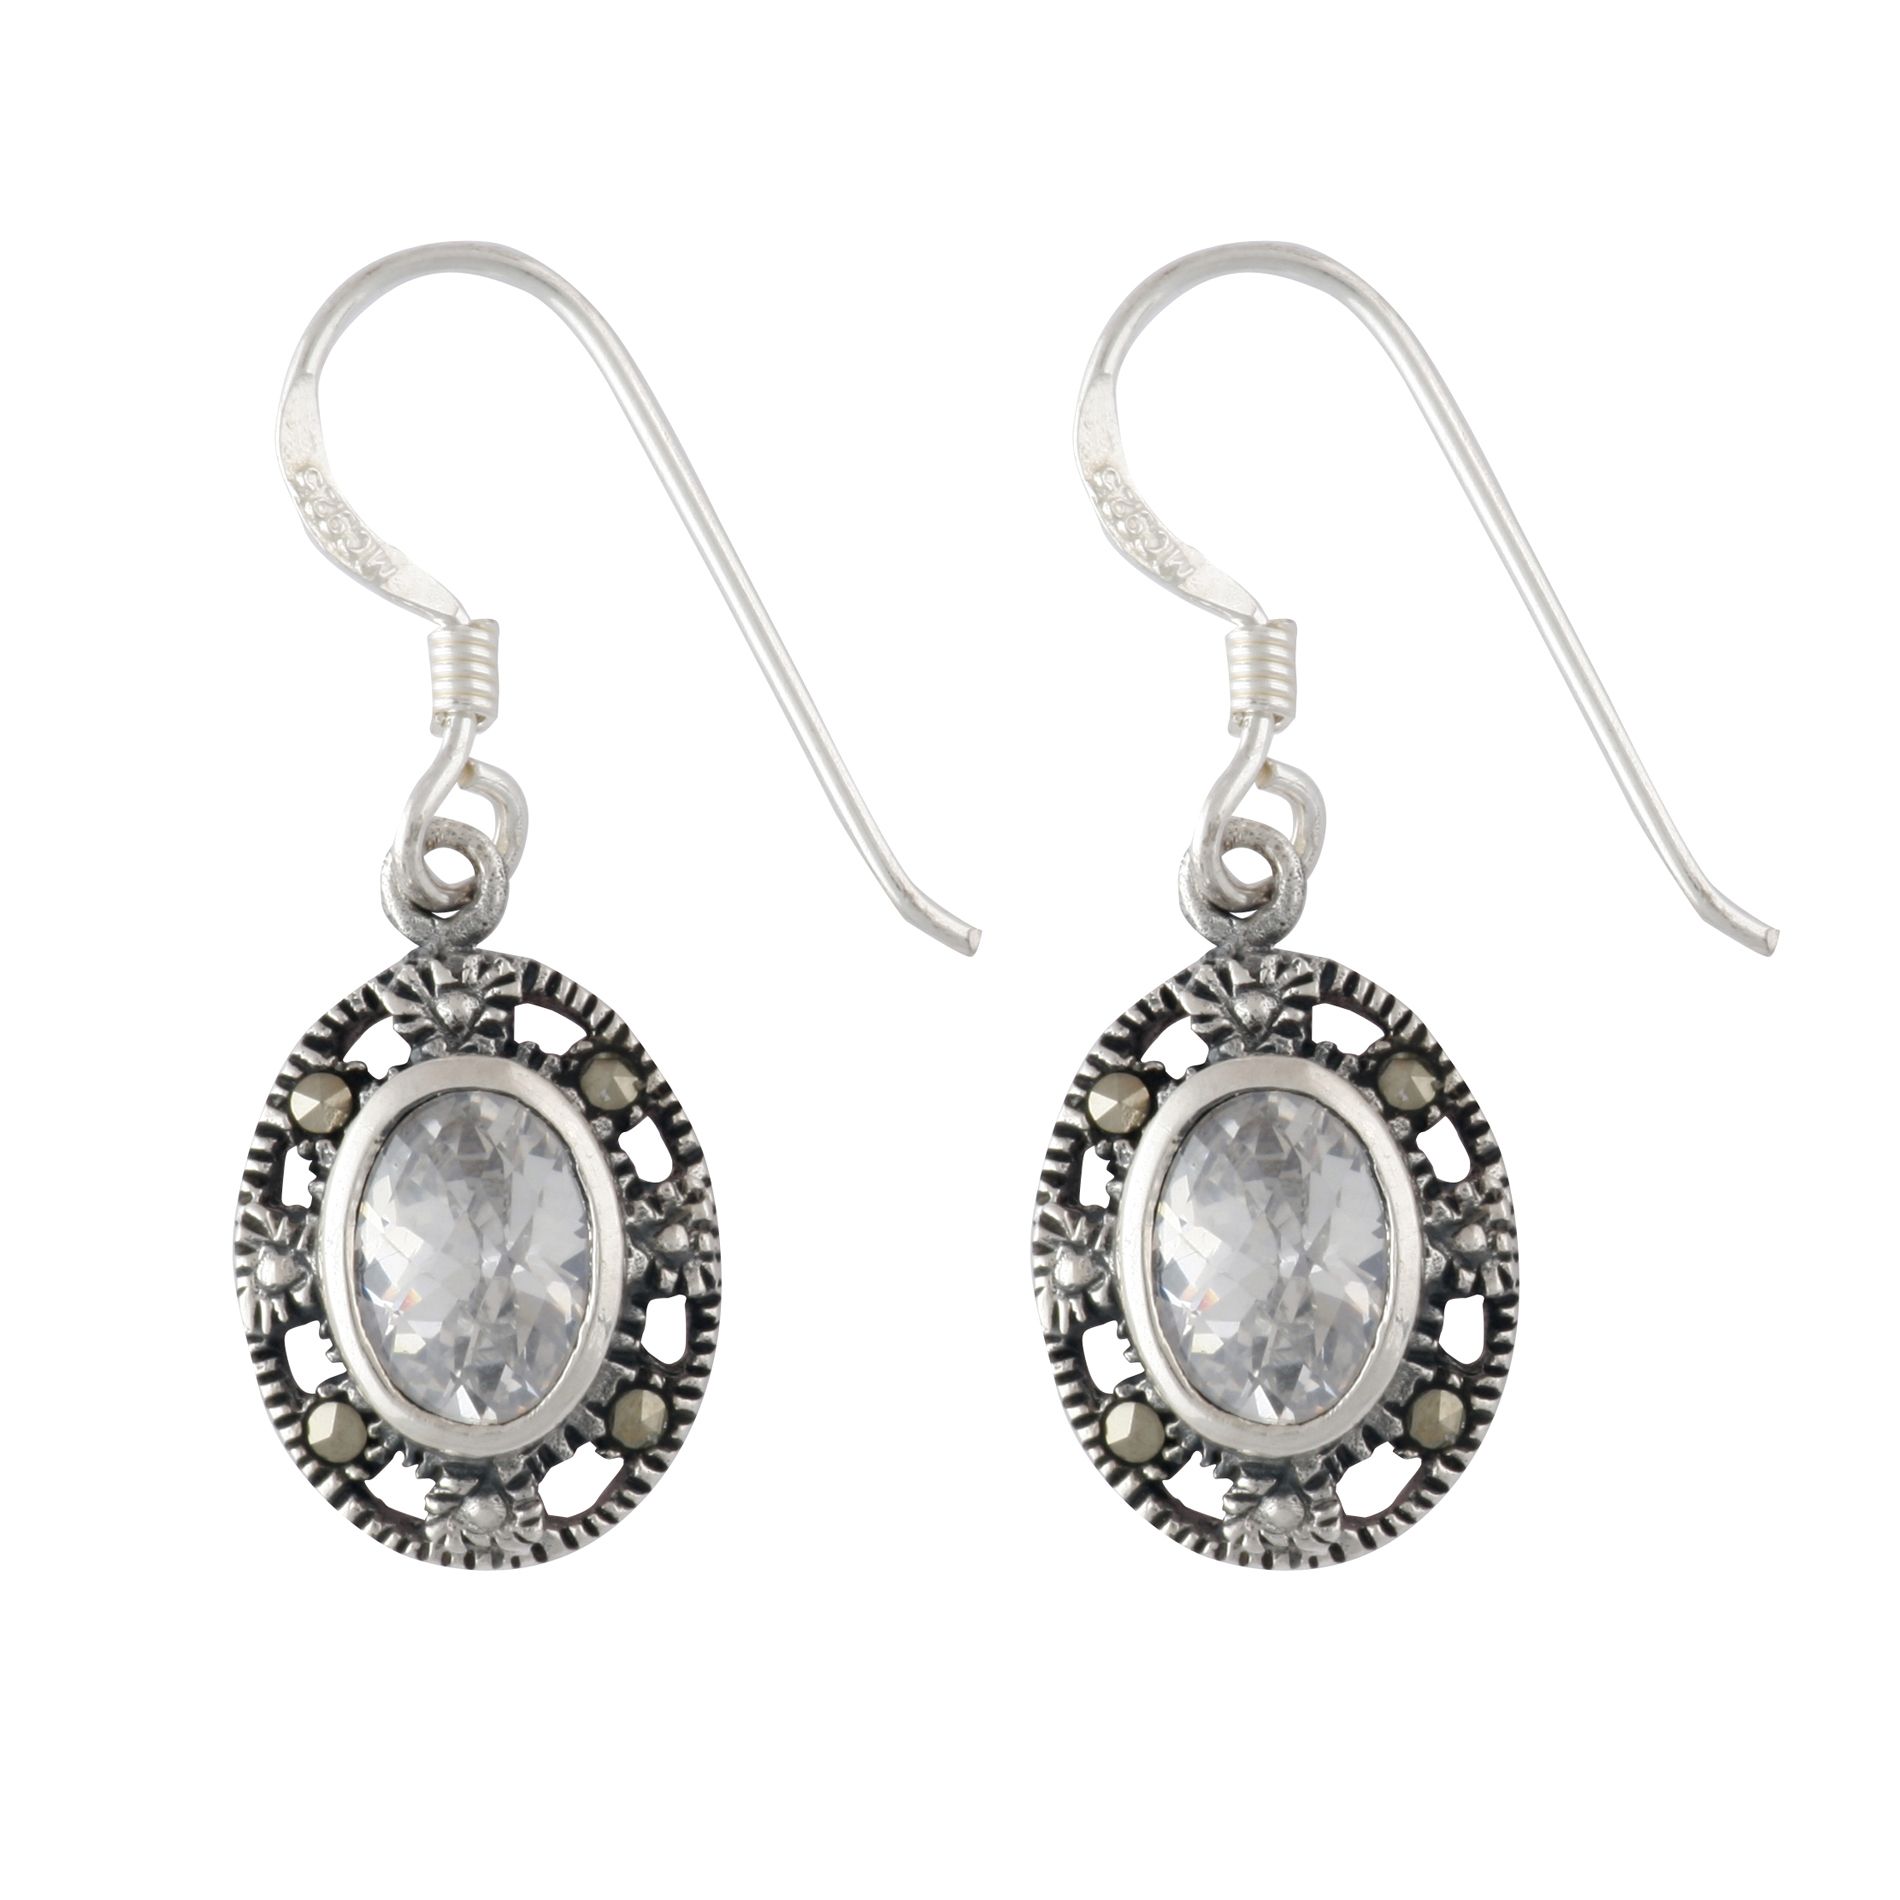 Sterling Silver, Marcasite and Clear Oval Glass Drop Earrings